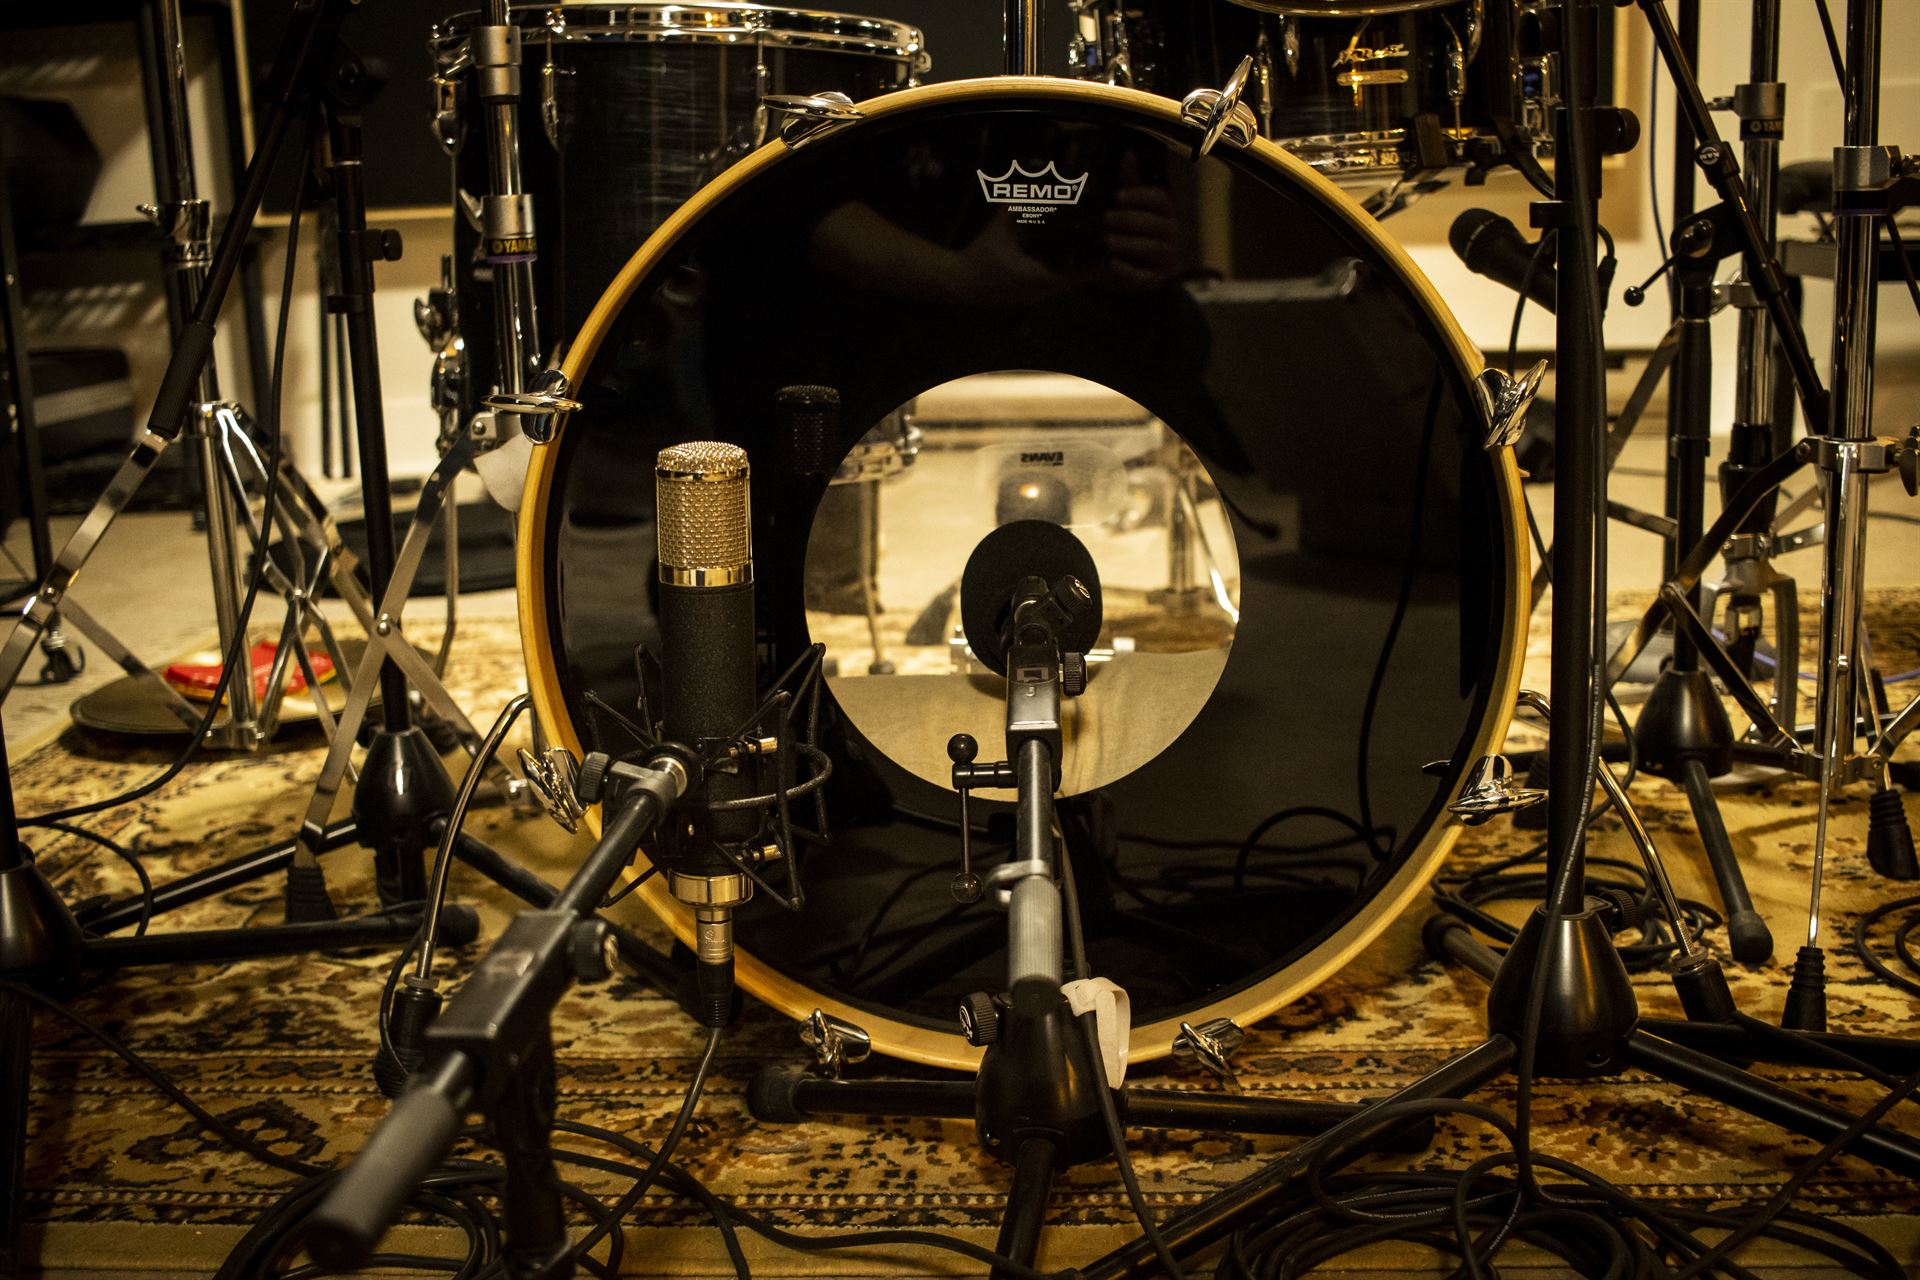 A drumset kick from close up with microphones pointed in the middle.